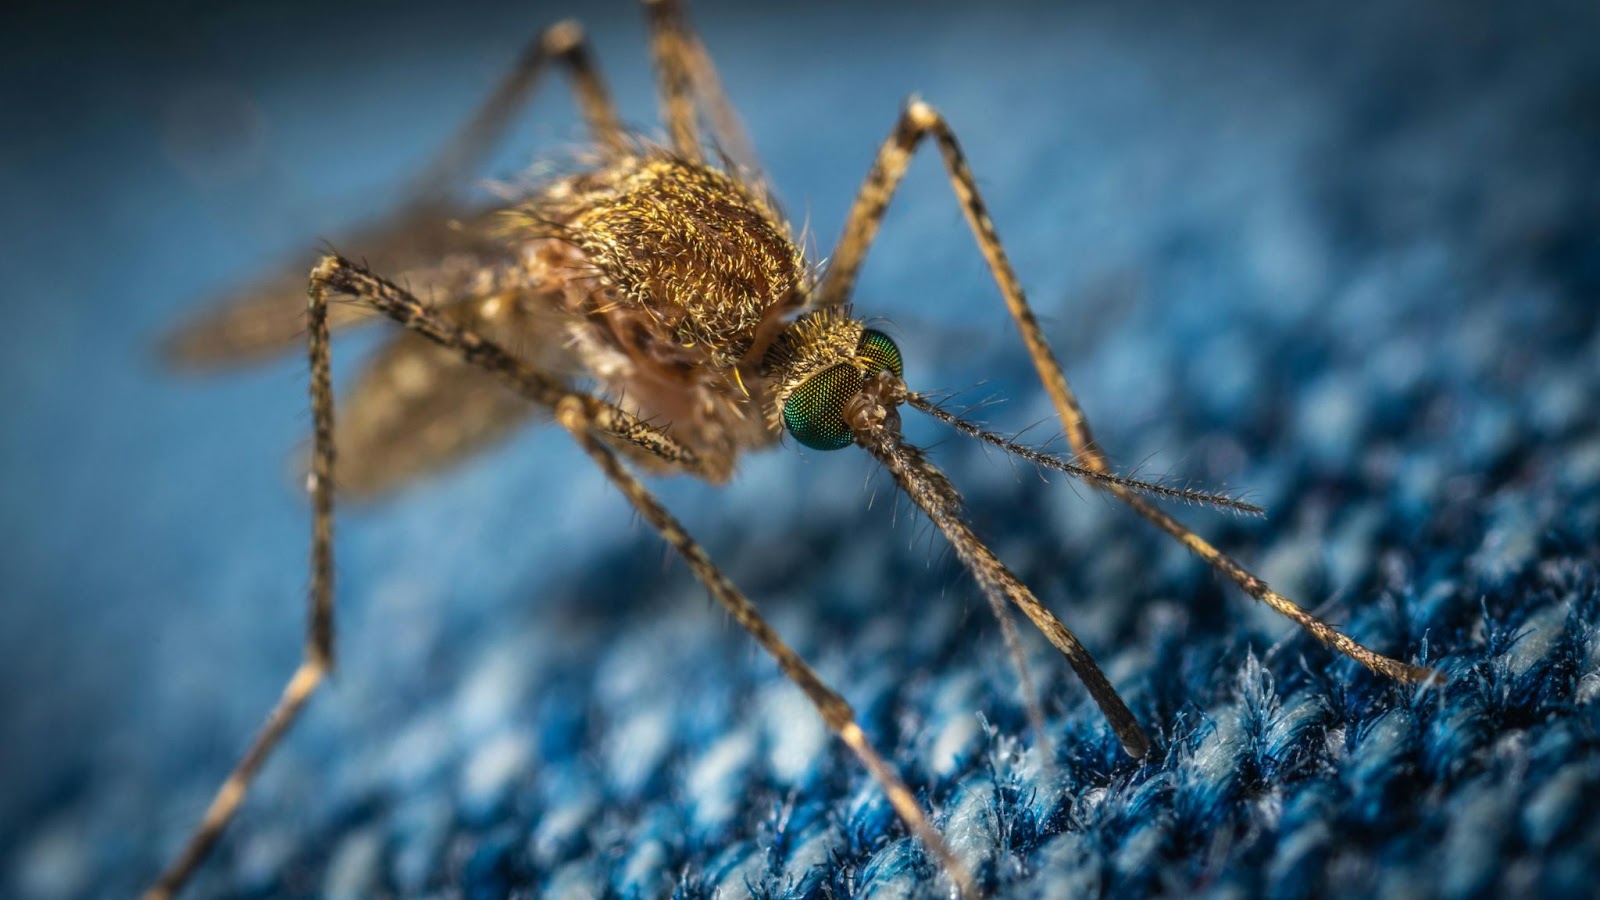 Macro close-up of a brown mosquito on a blue fabric background.